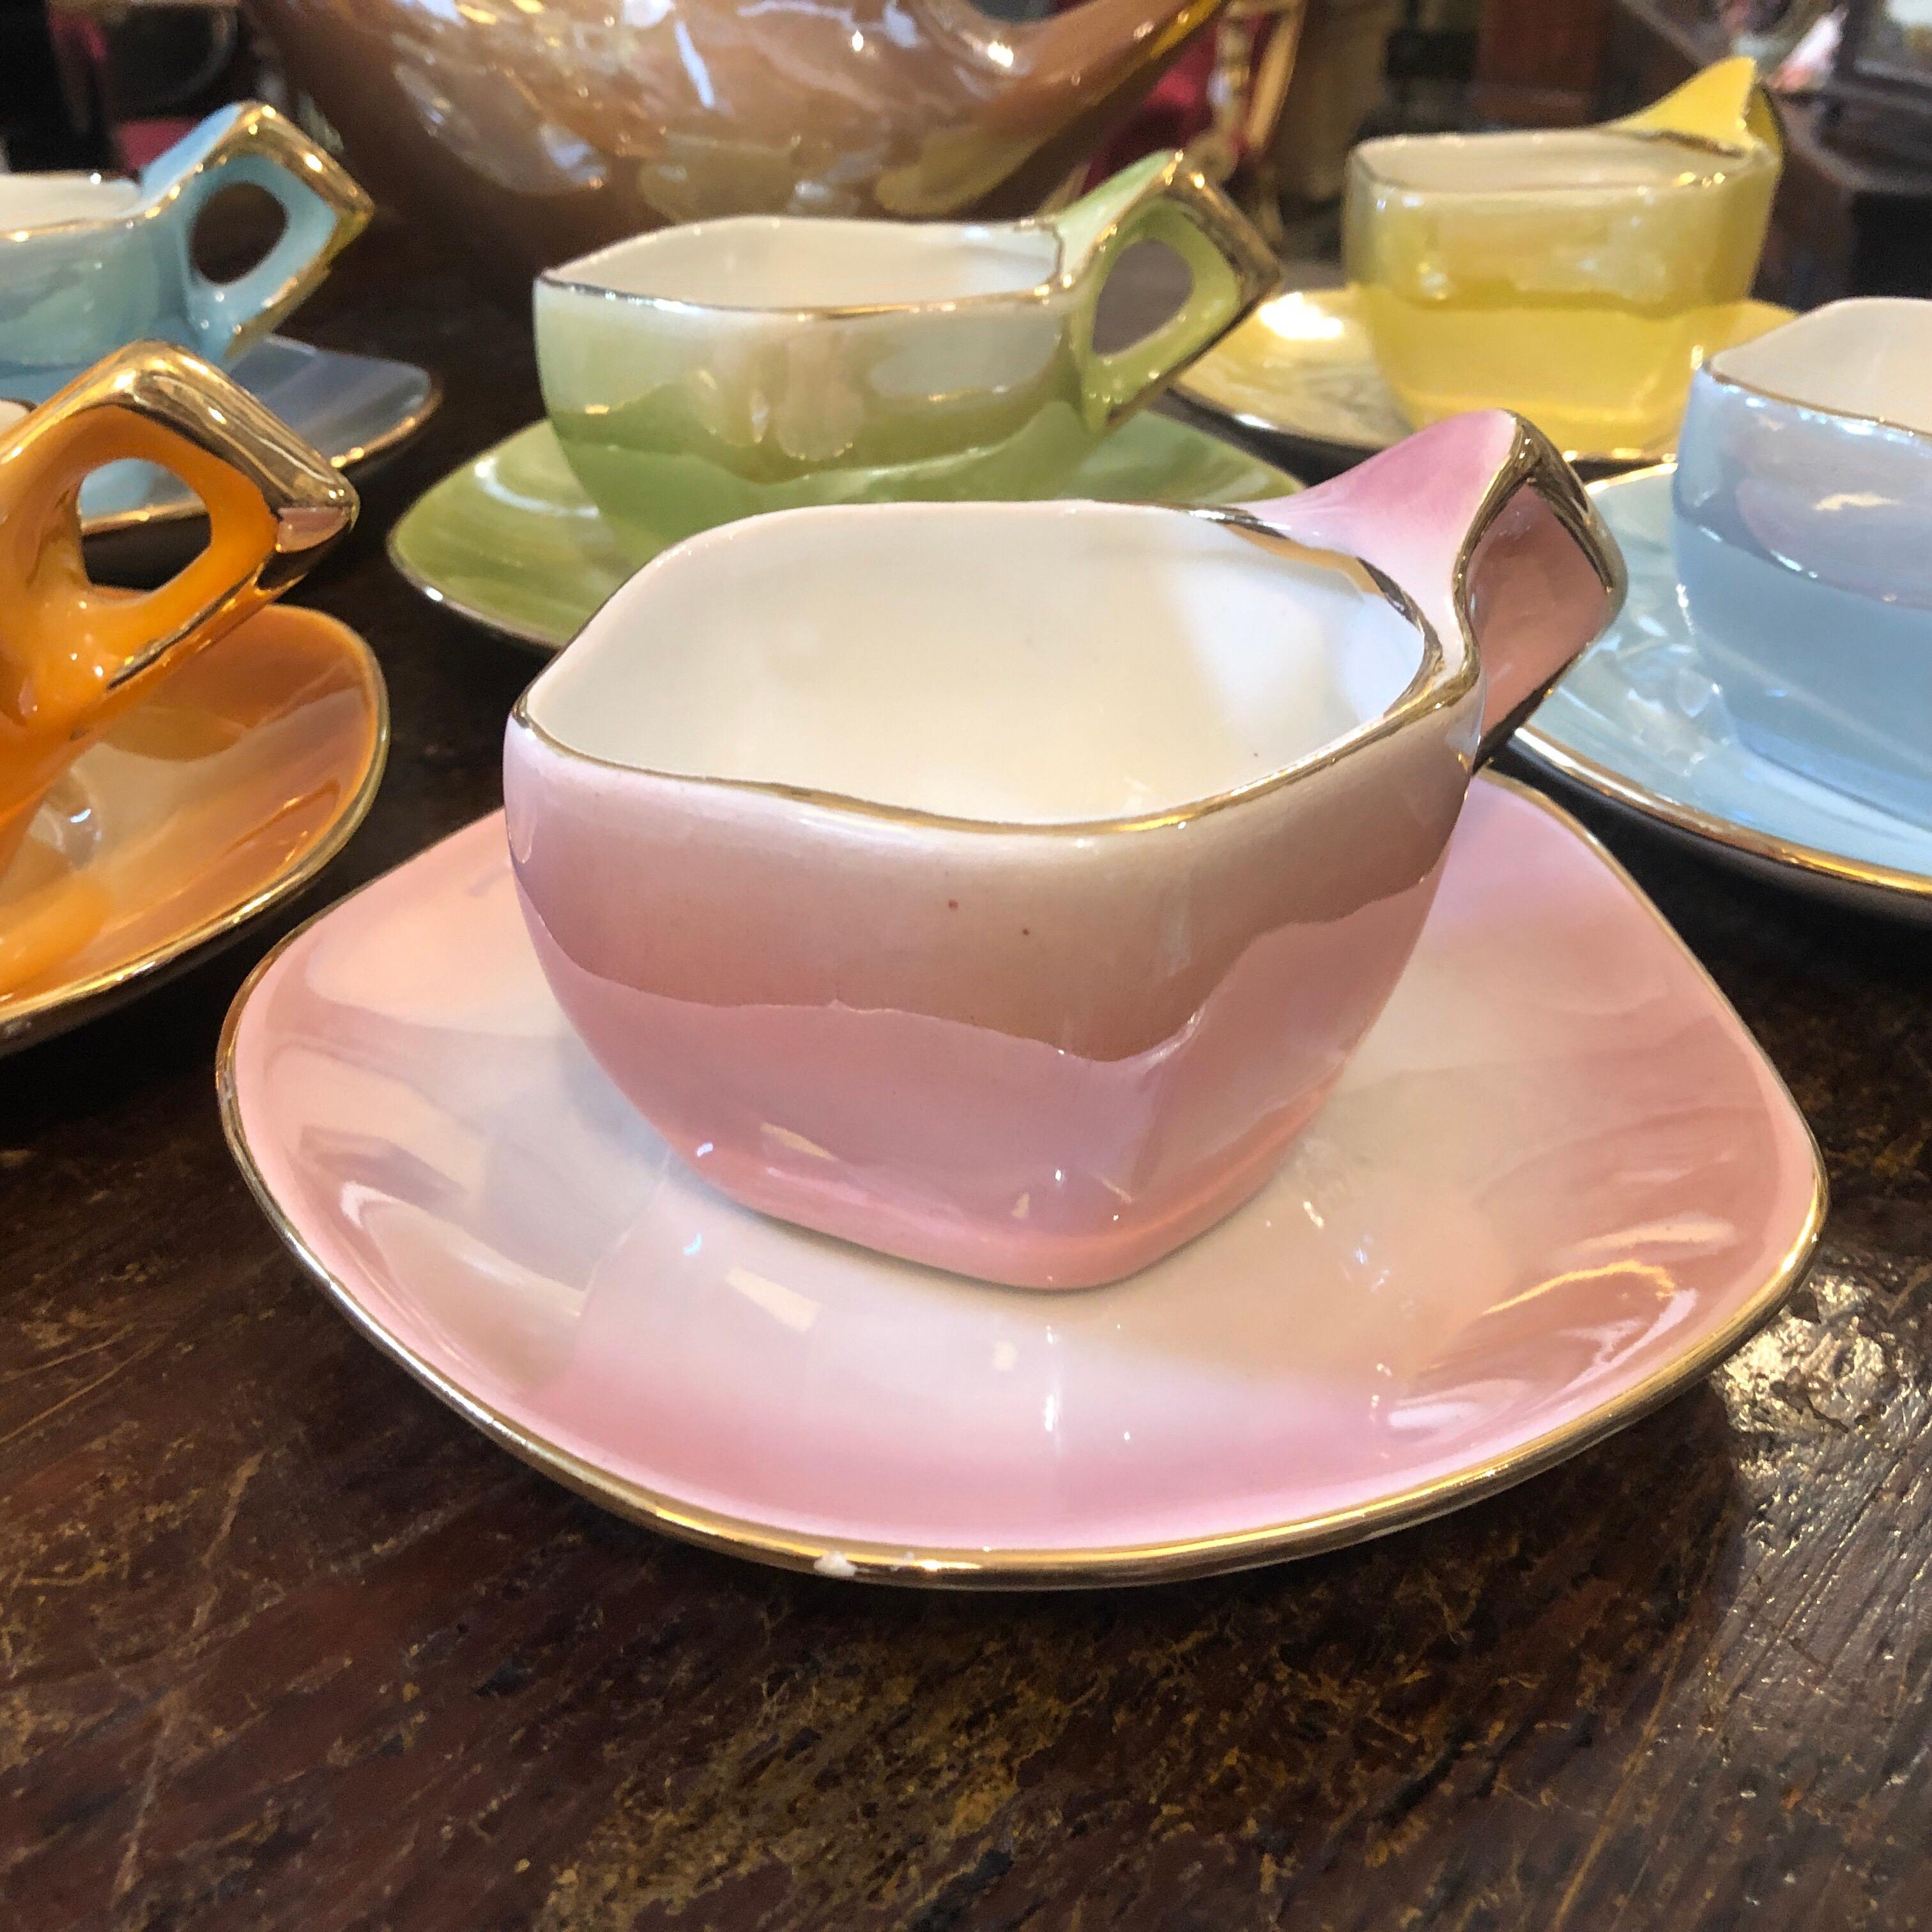 A Mid-Century Modern tea set made in Italy in the 1950s by Italo Casini. It's in perfect conditions. Measures: Diameter of the cups is 3.54 inches.